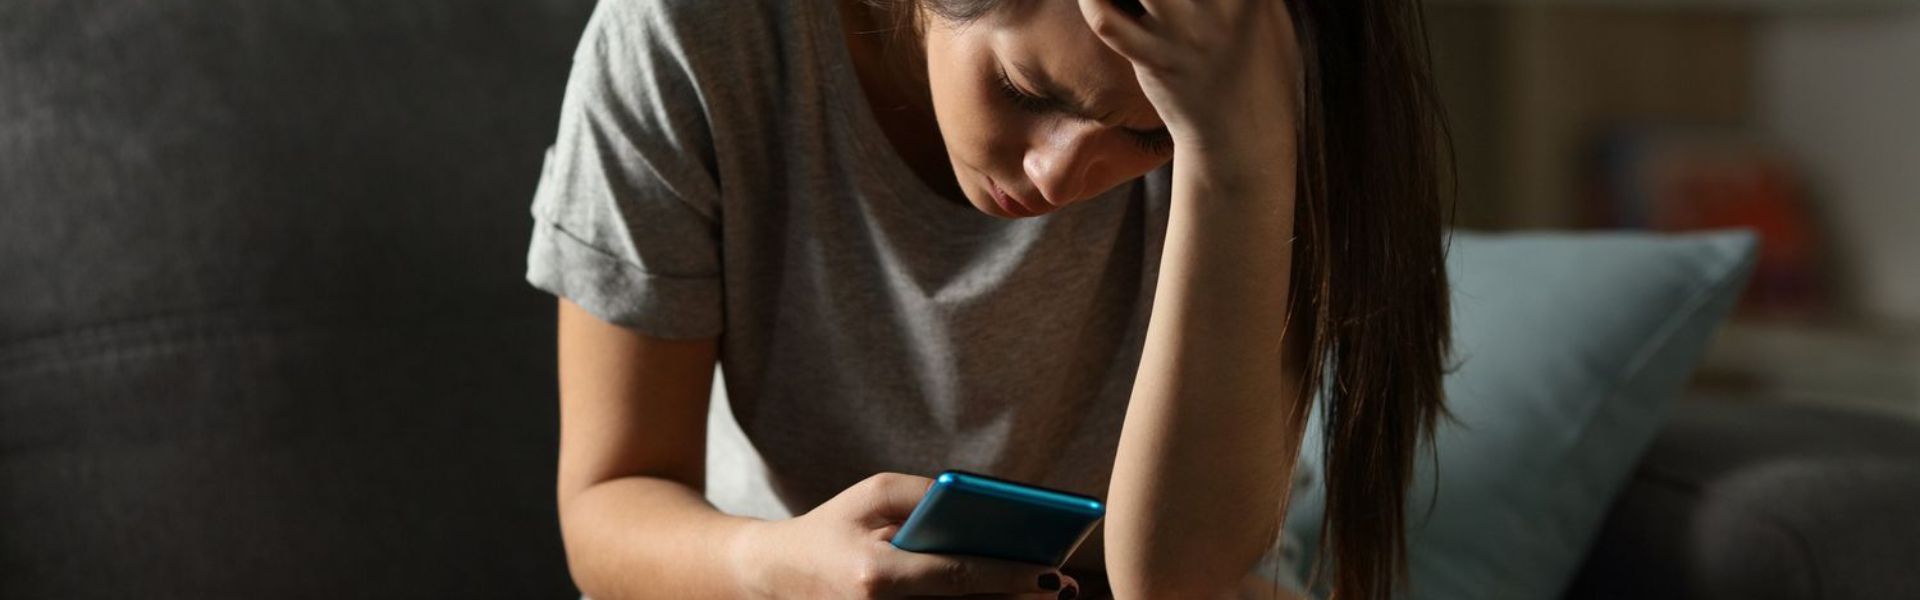 Clicking Through Trauma: Recognizing and Combating Digital Abuse